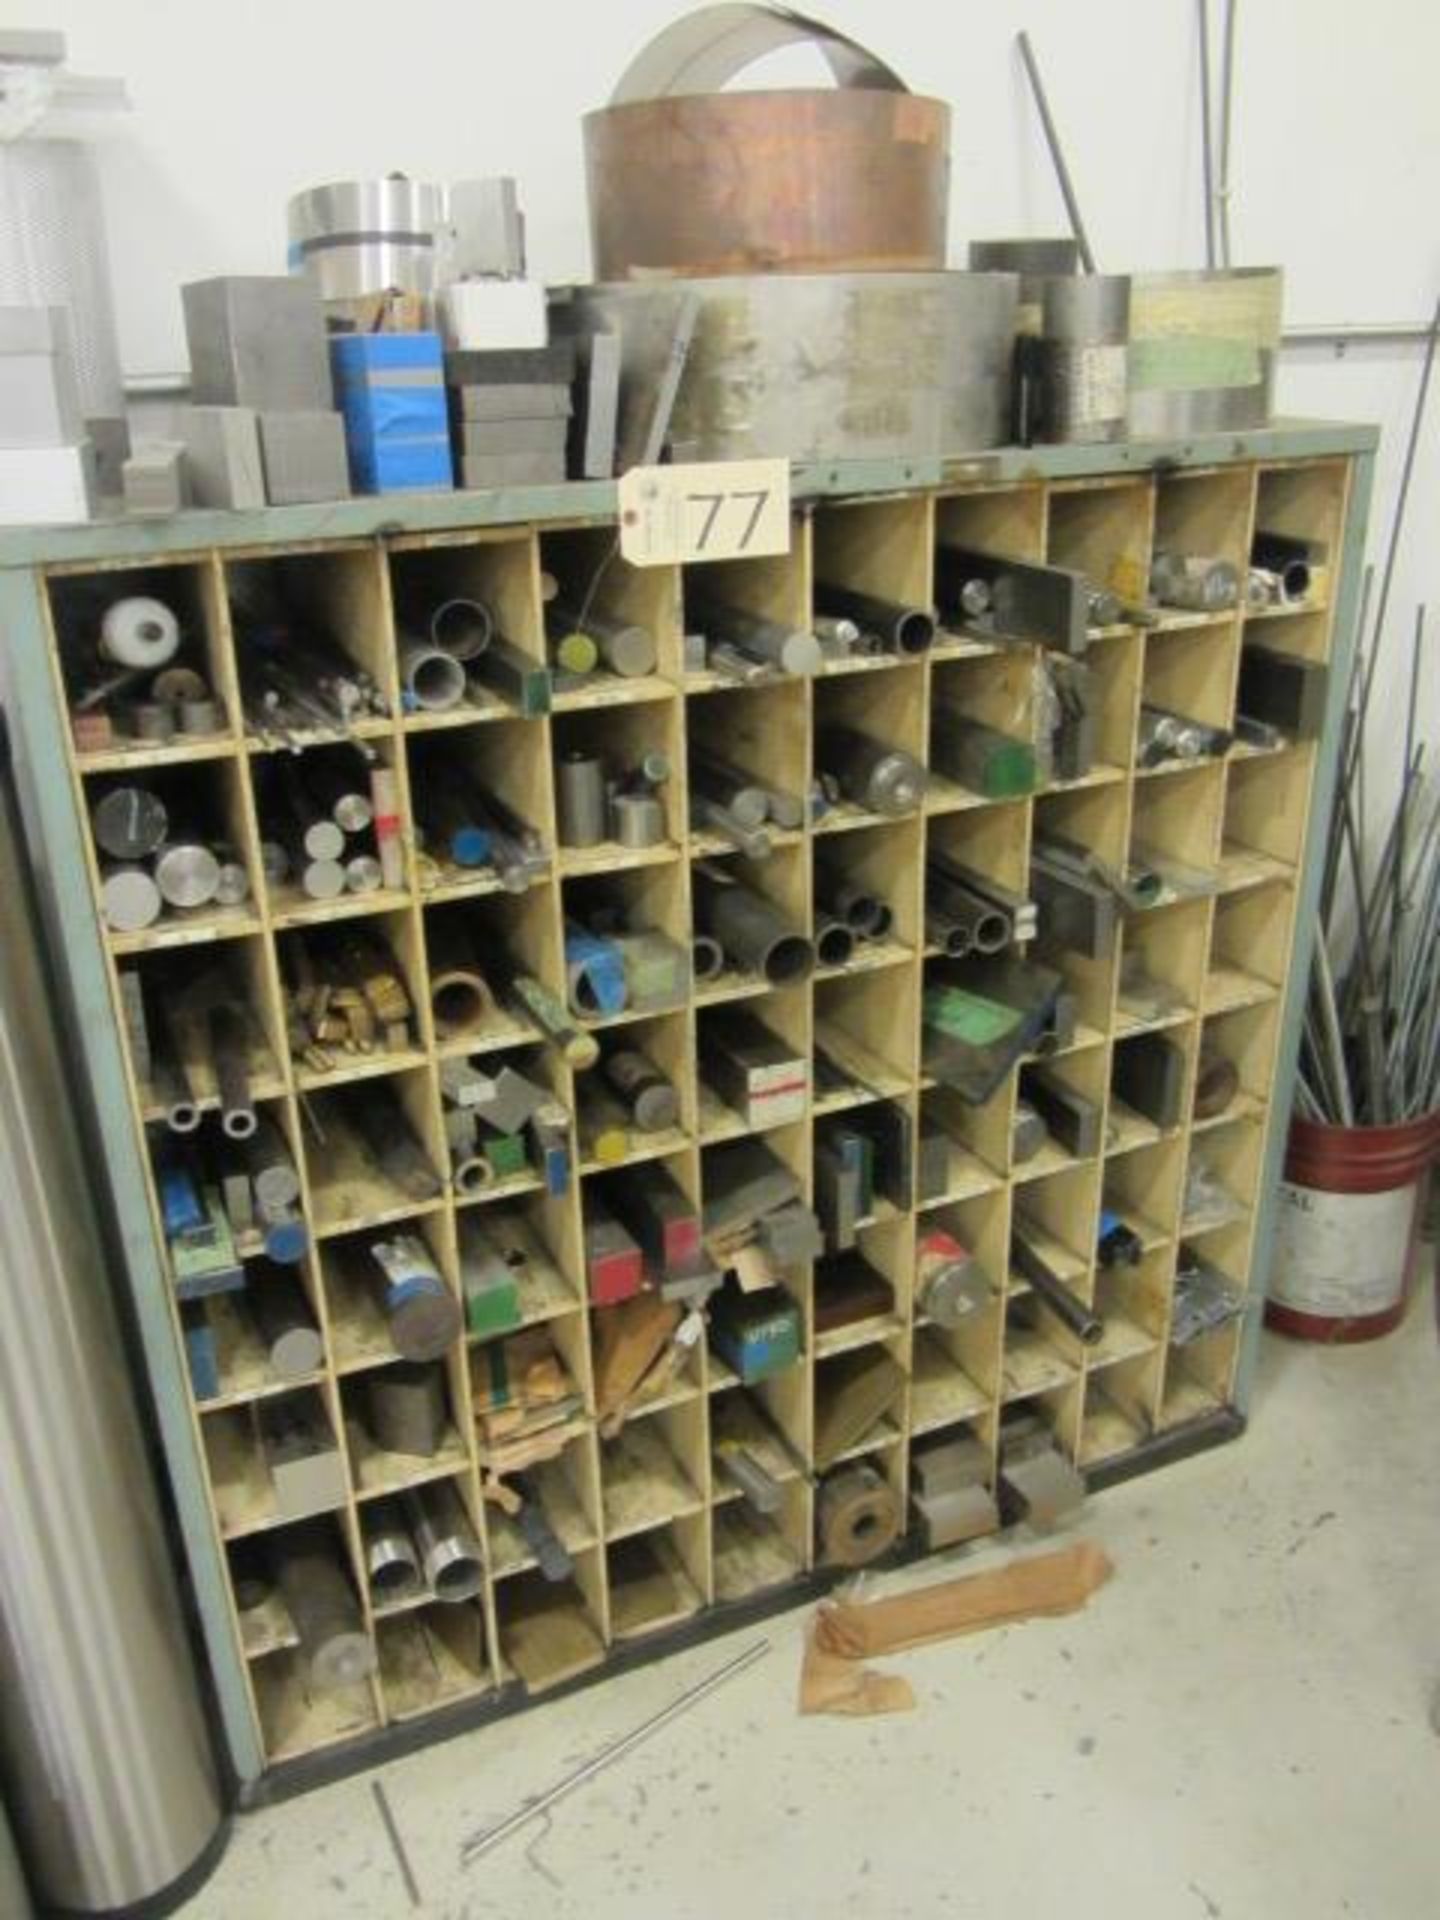 Cabinet & Contents of Usable Steel